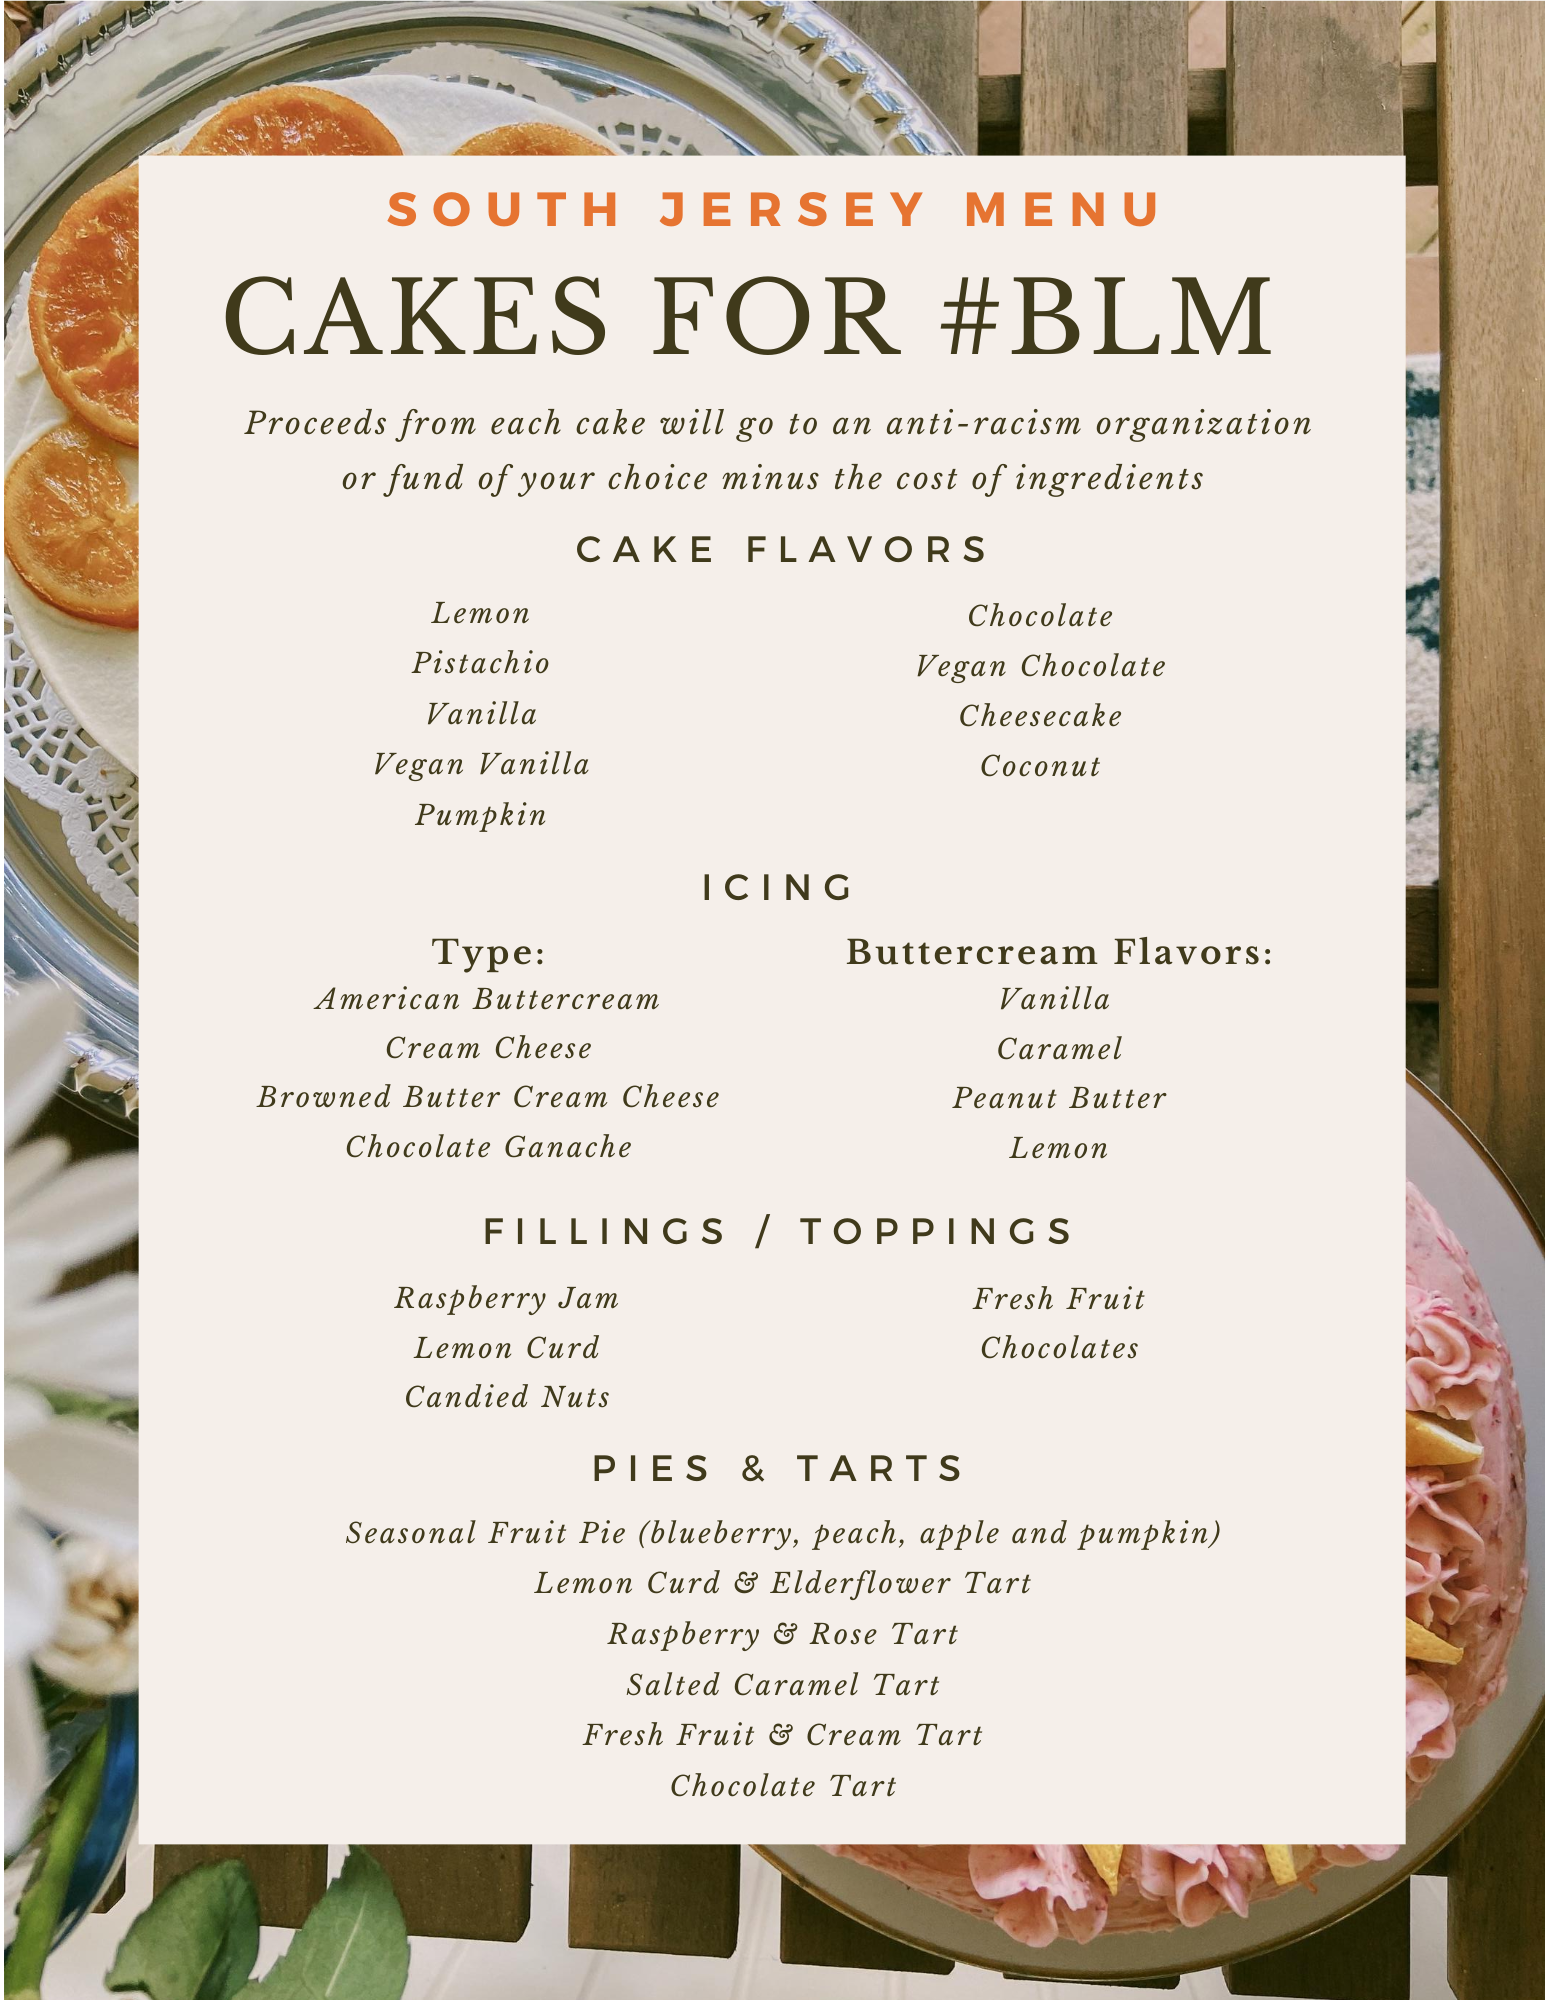 Cakes for BLM - South Jersey menu